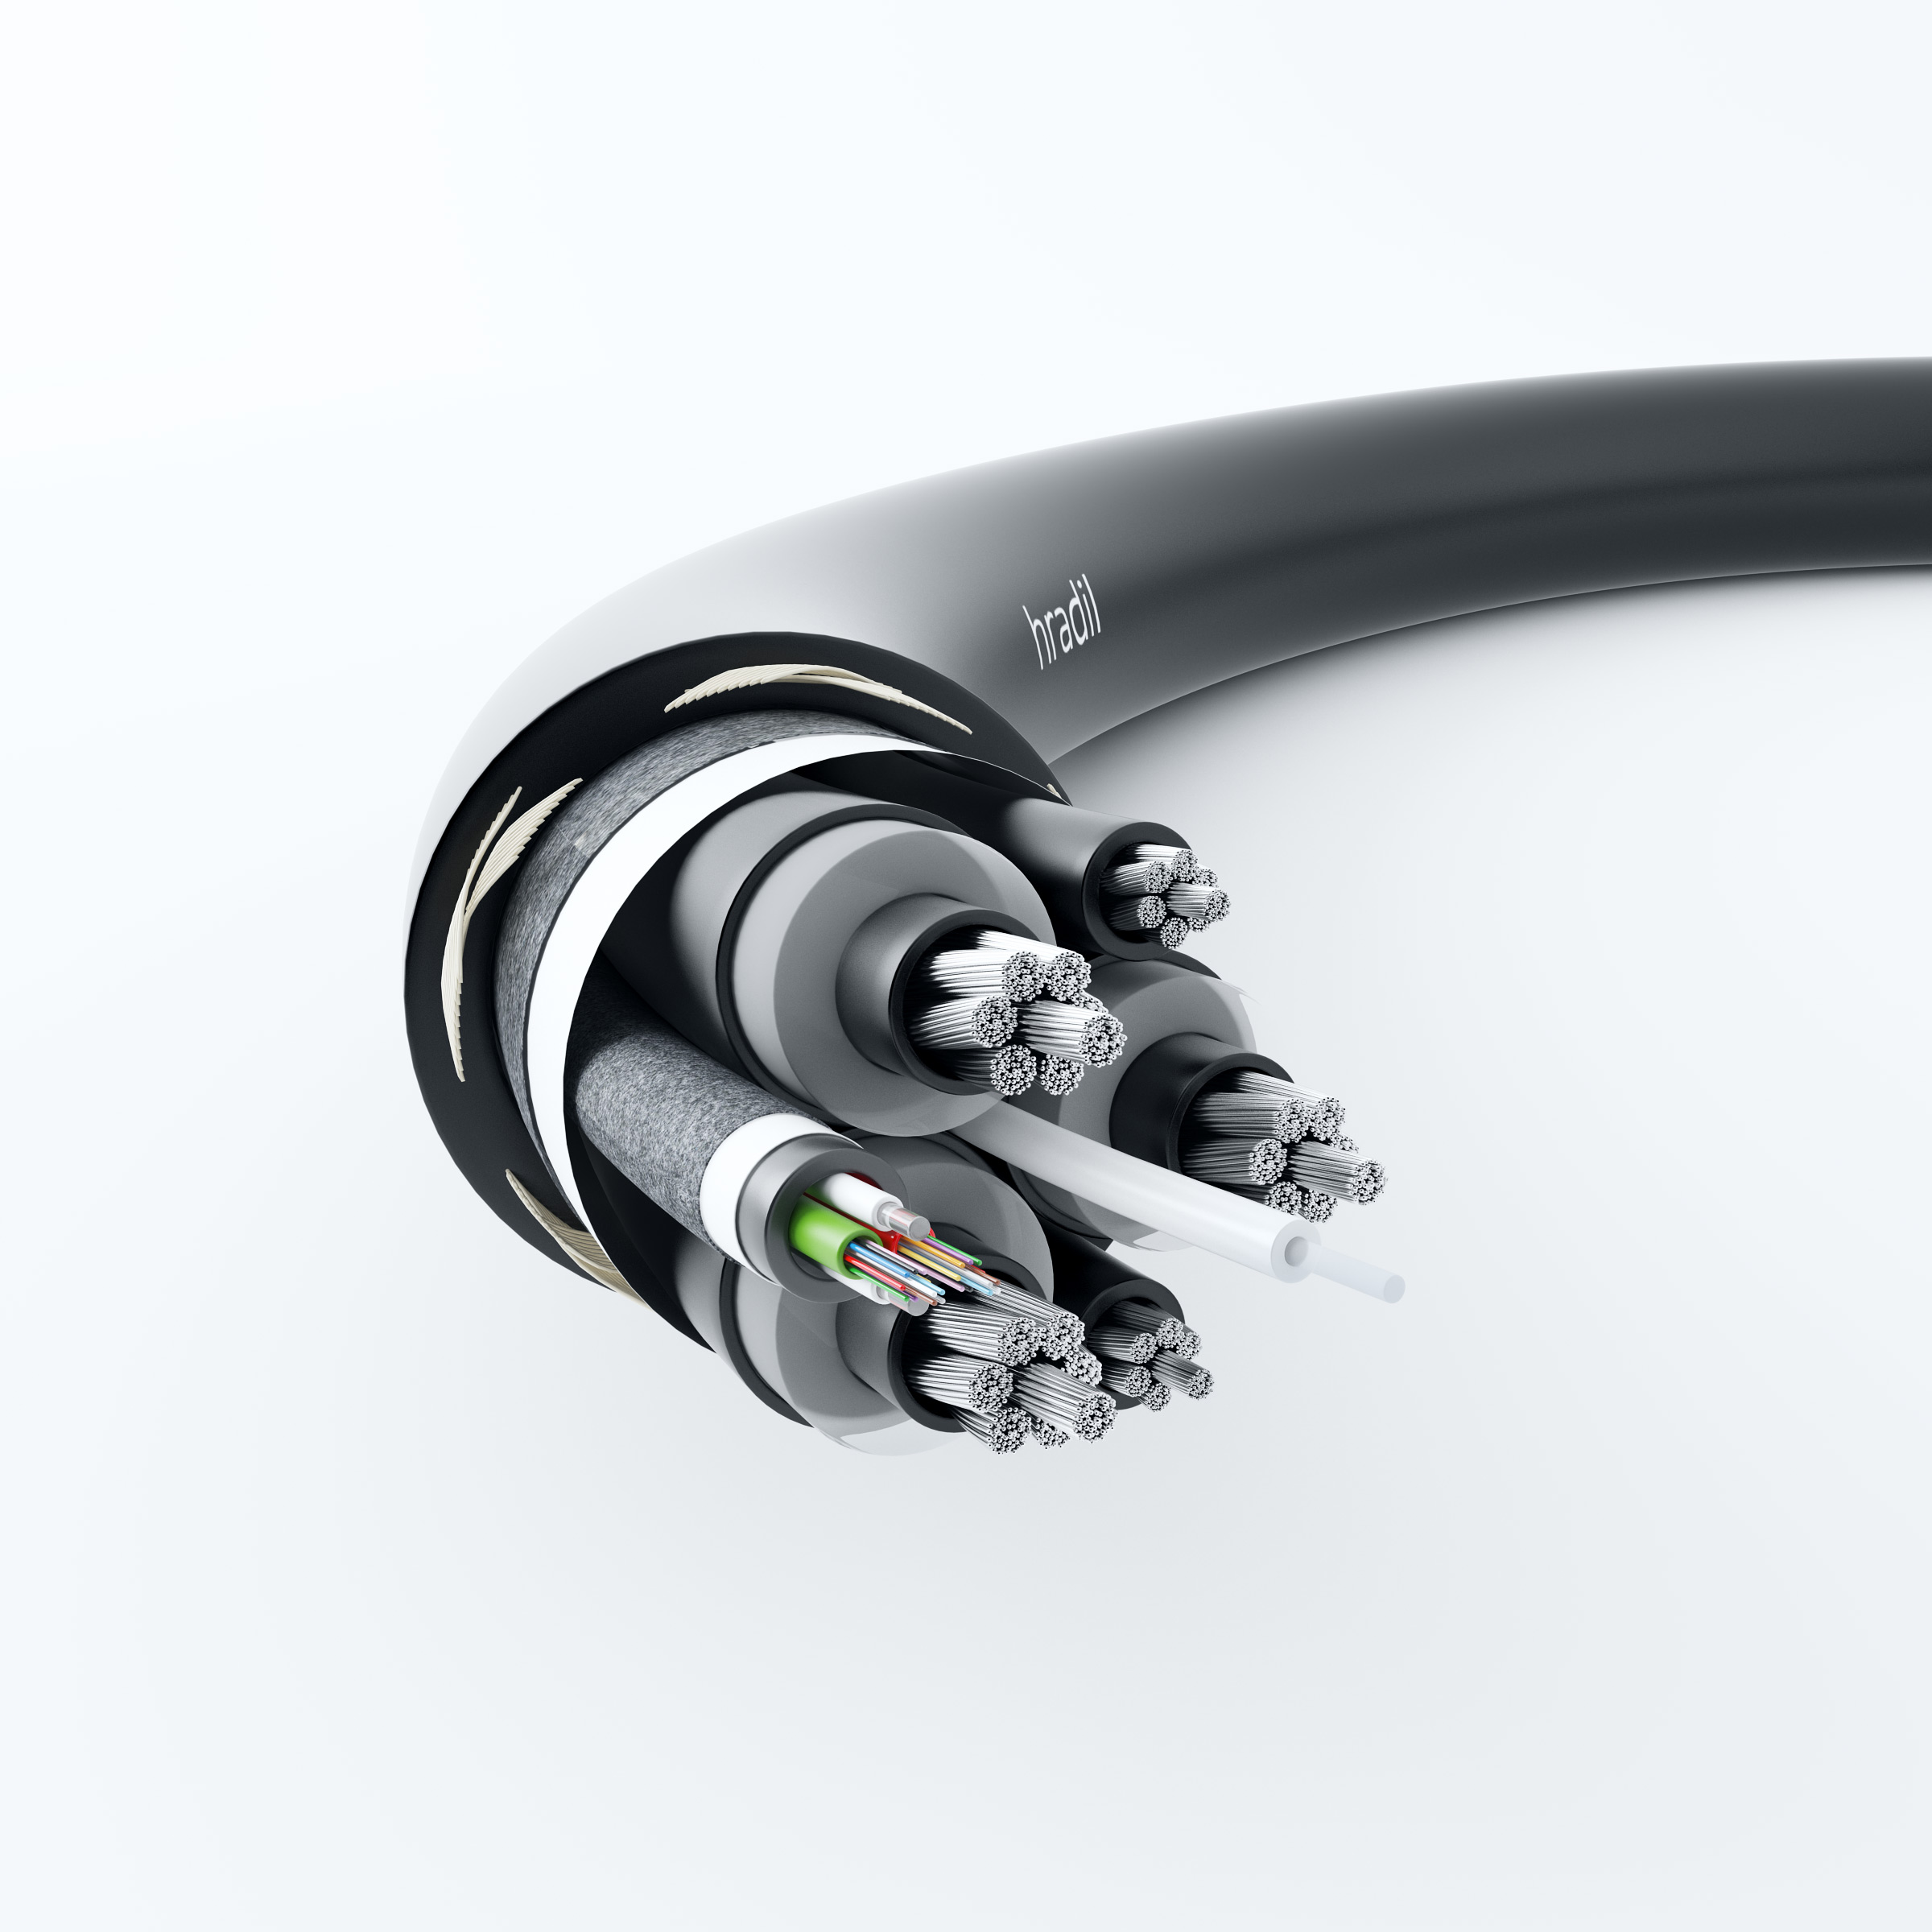 High endurance cable features a nominal voltage in tough conditions